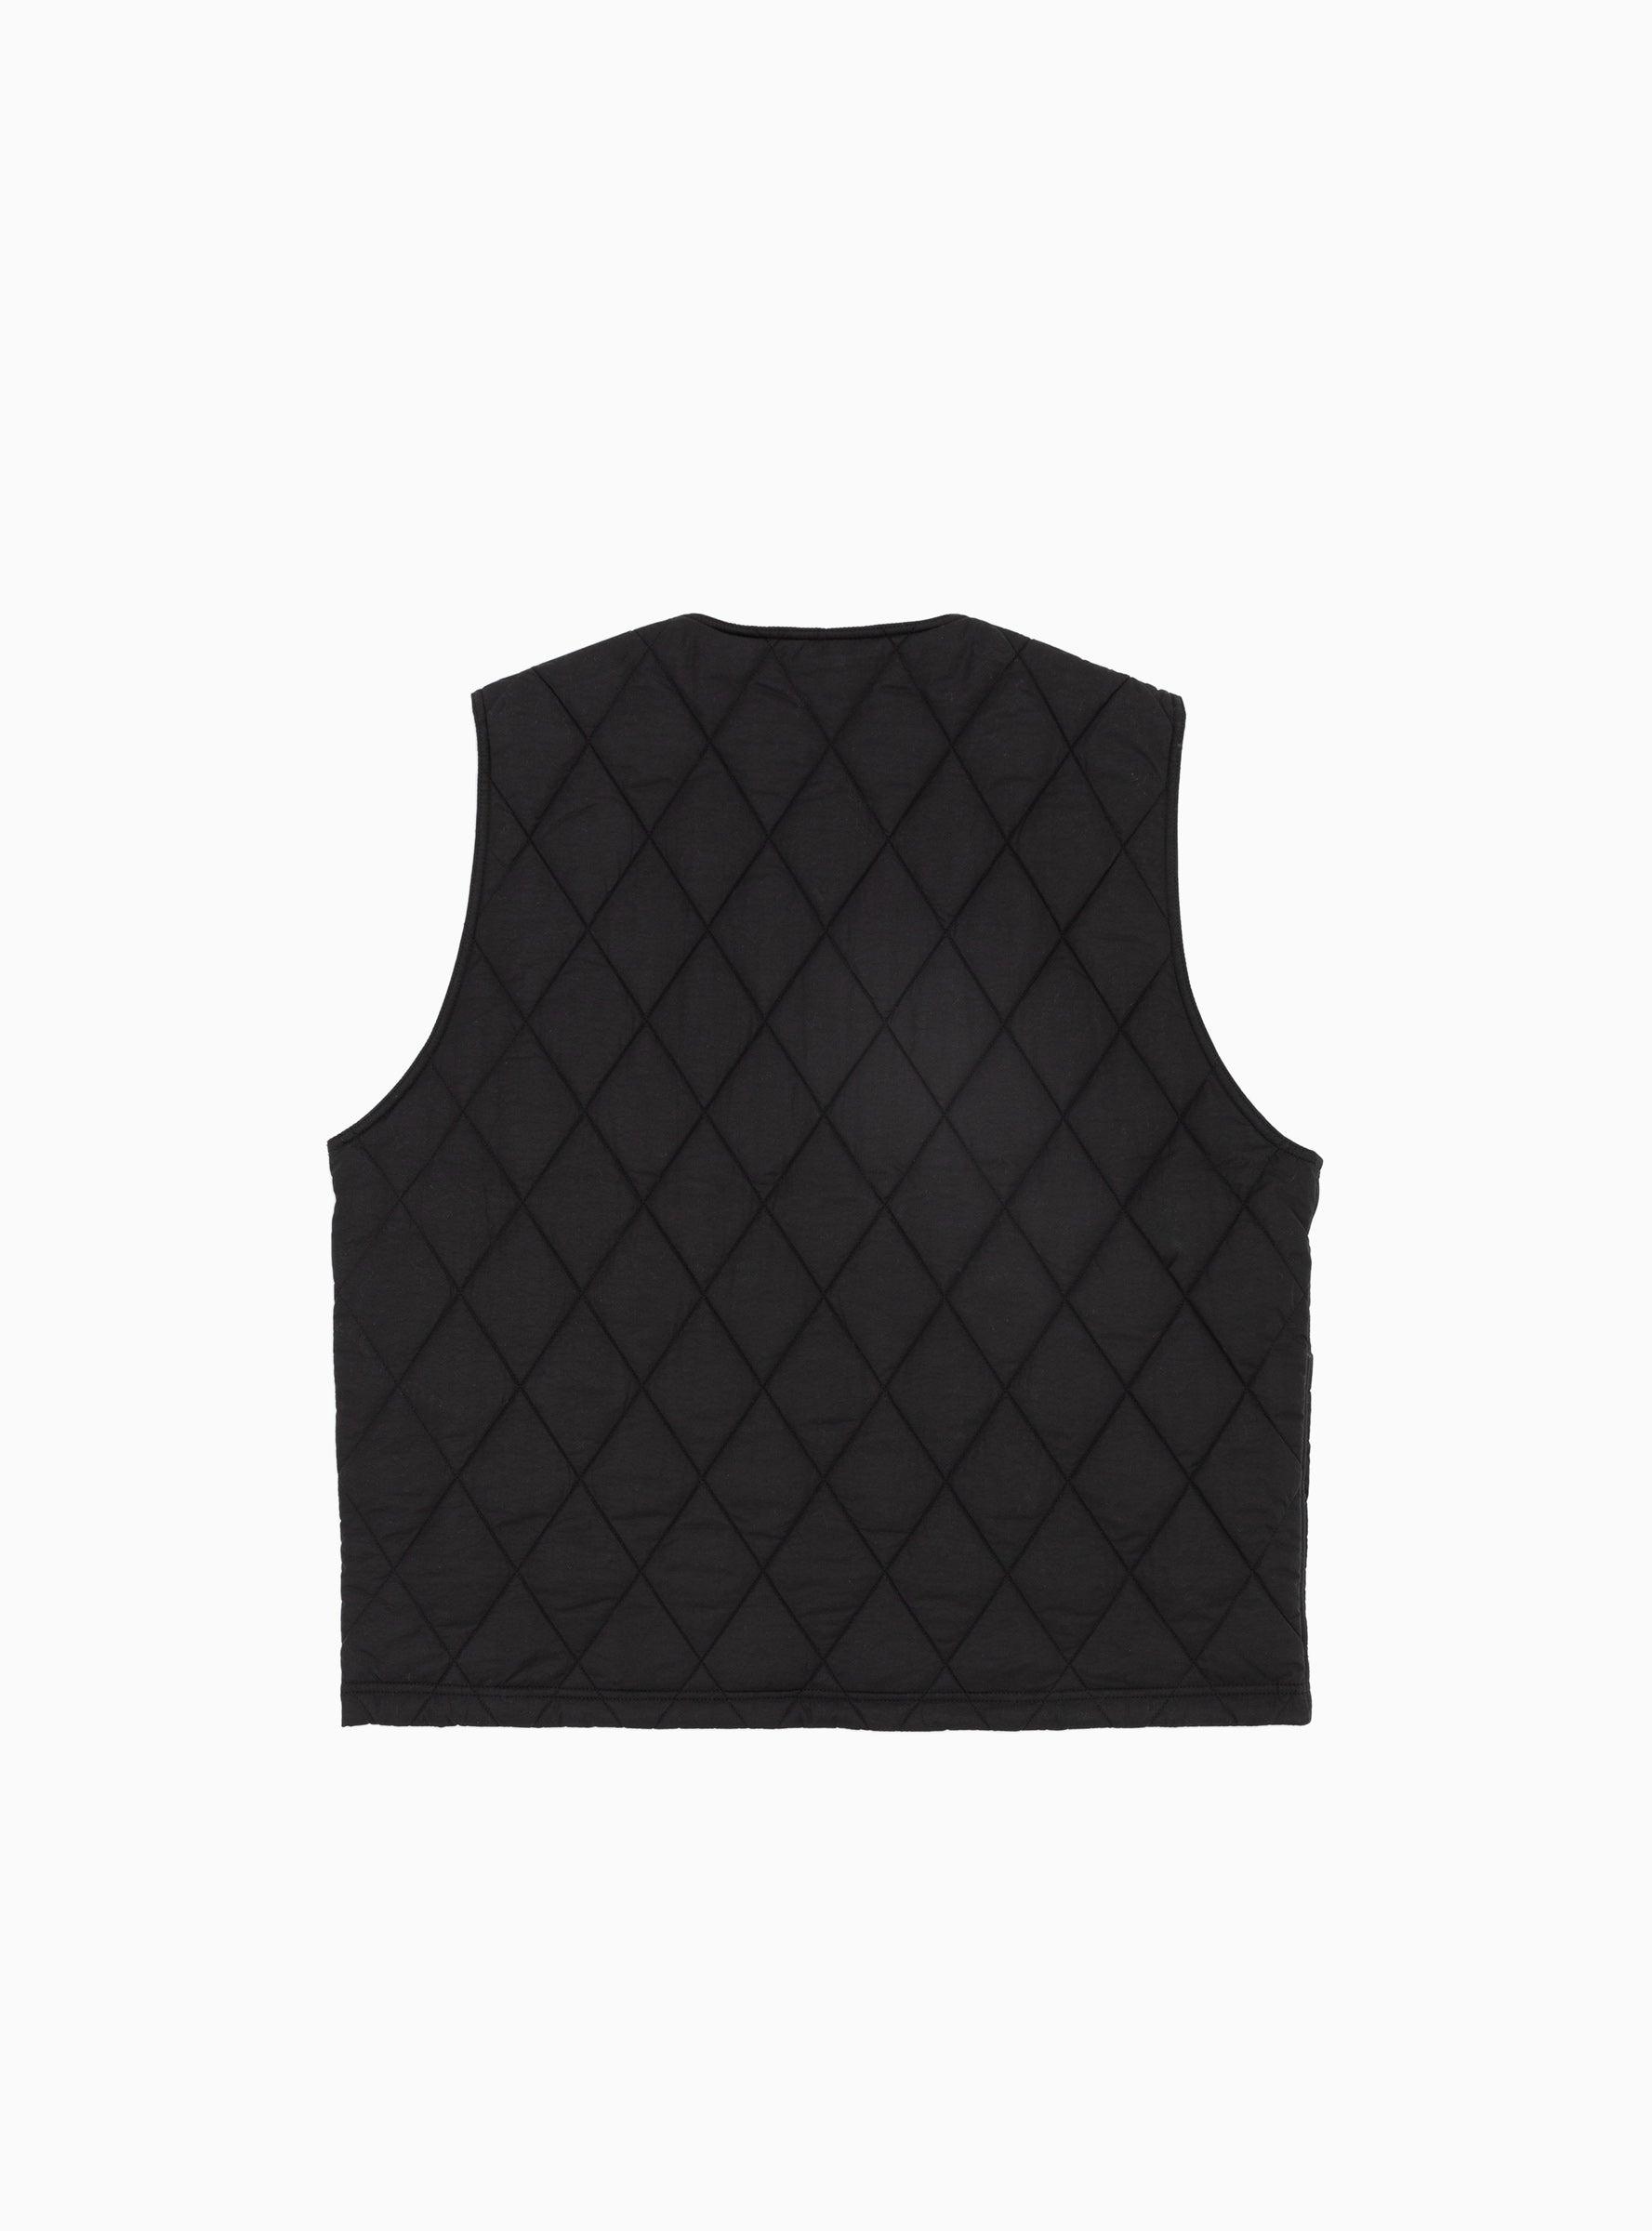 Stussy Diamond Quilted Vest Black for Men | Lyst Canada